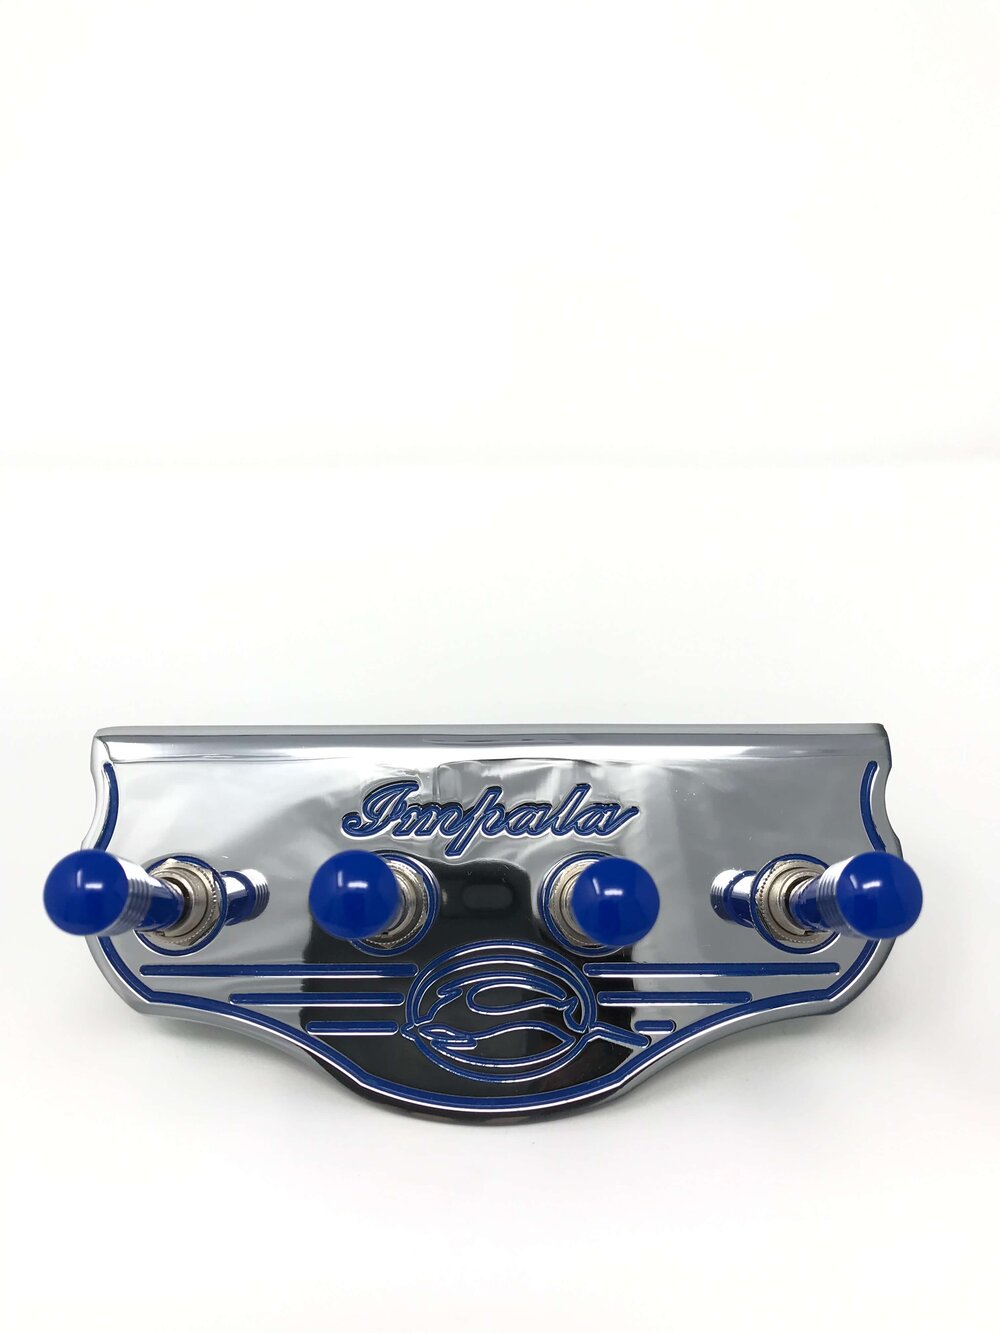 BILLET Blue Blue Anodized Plate w/ LED toggle switches